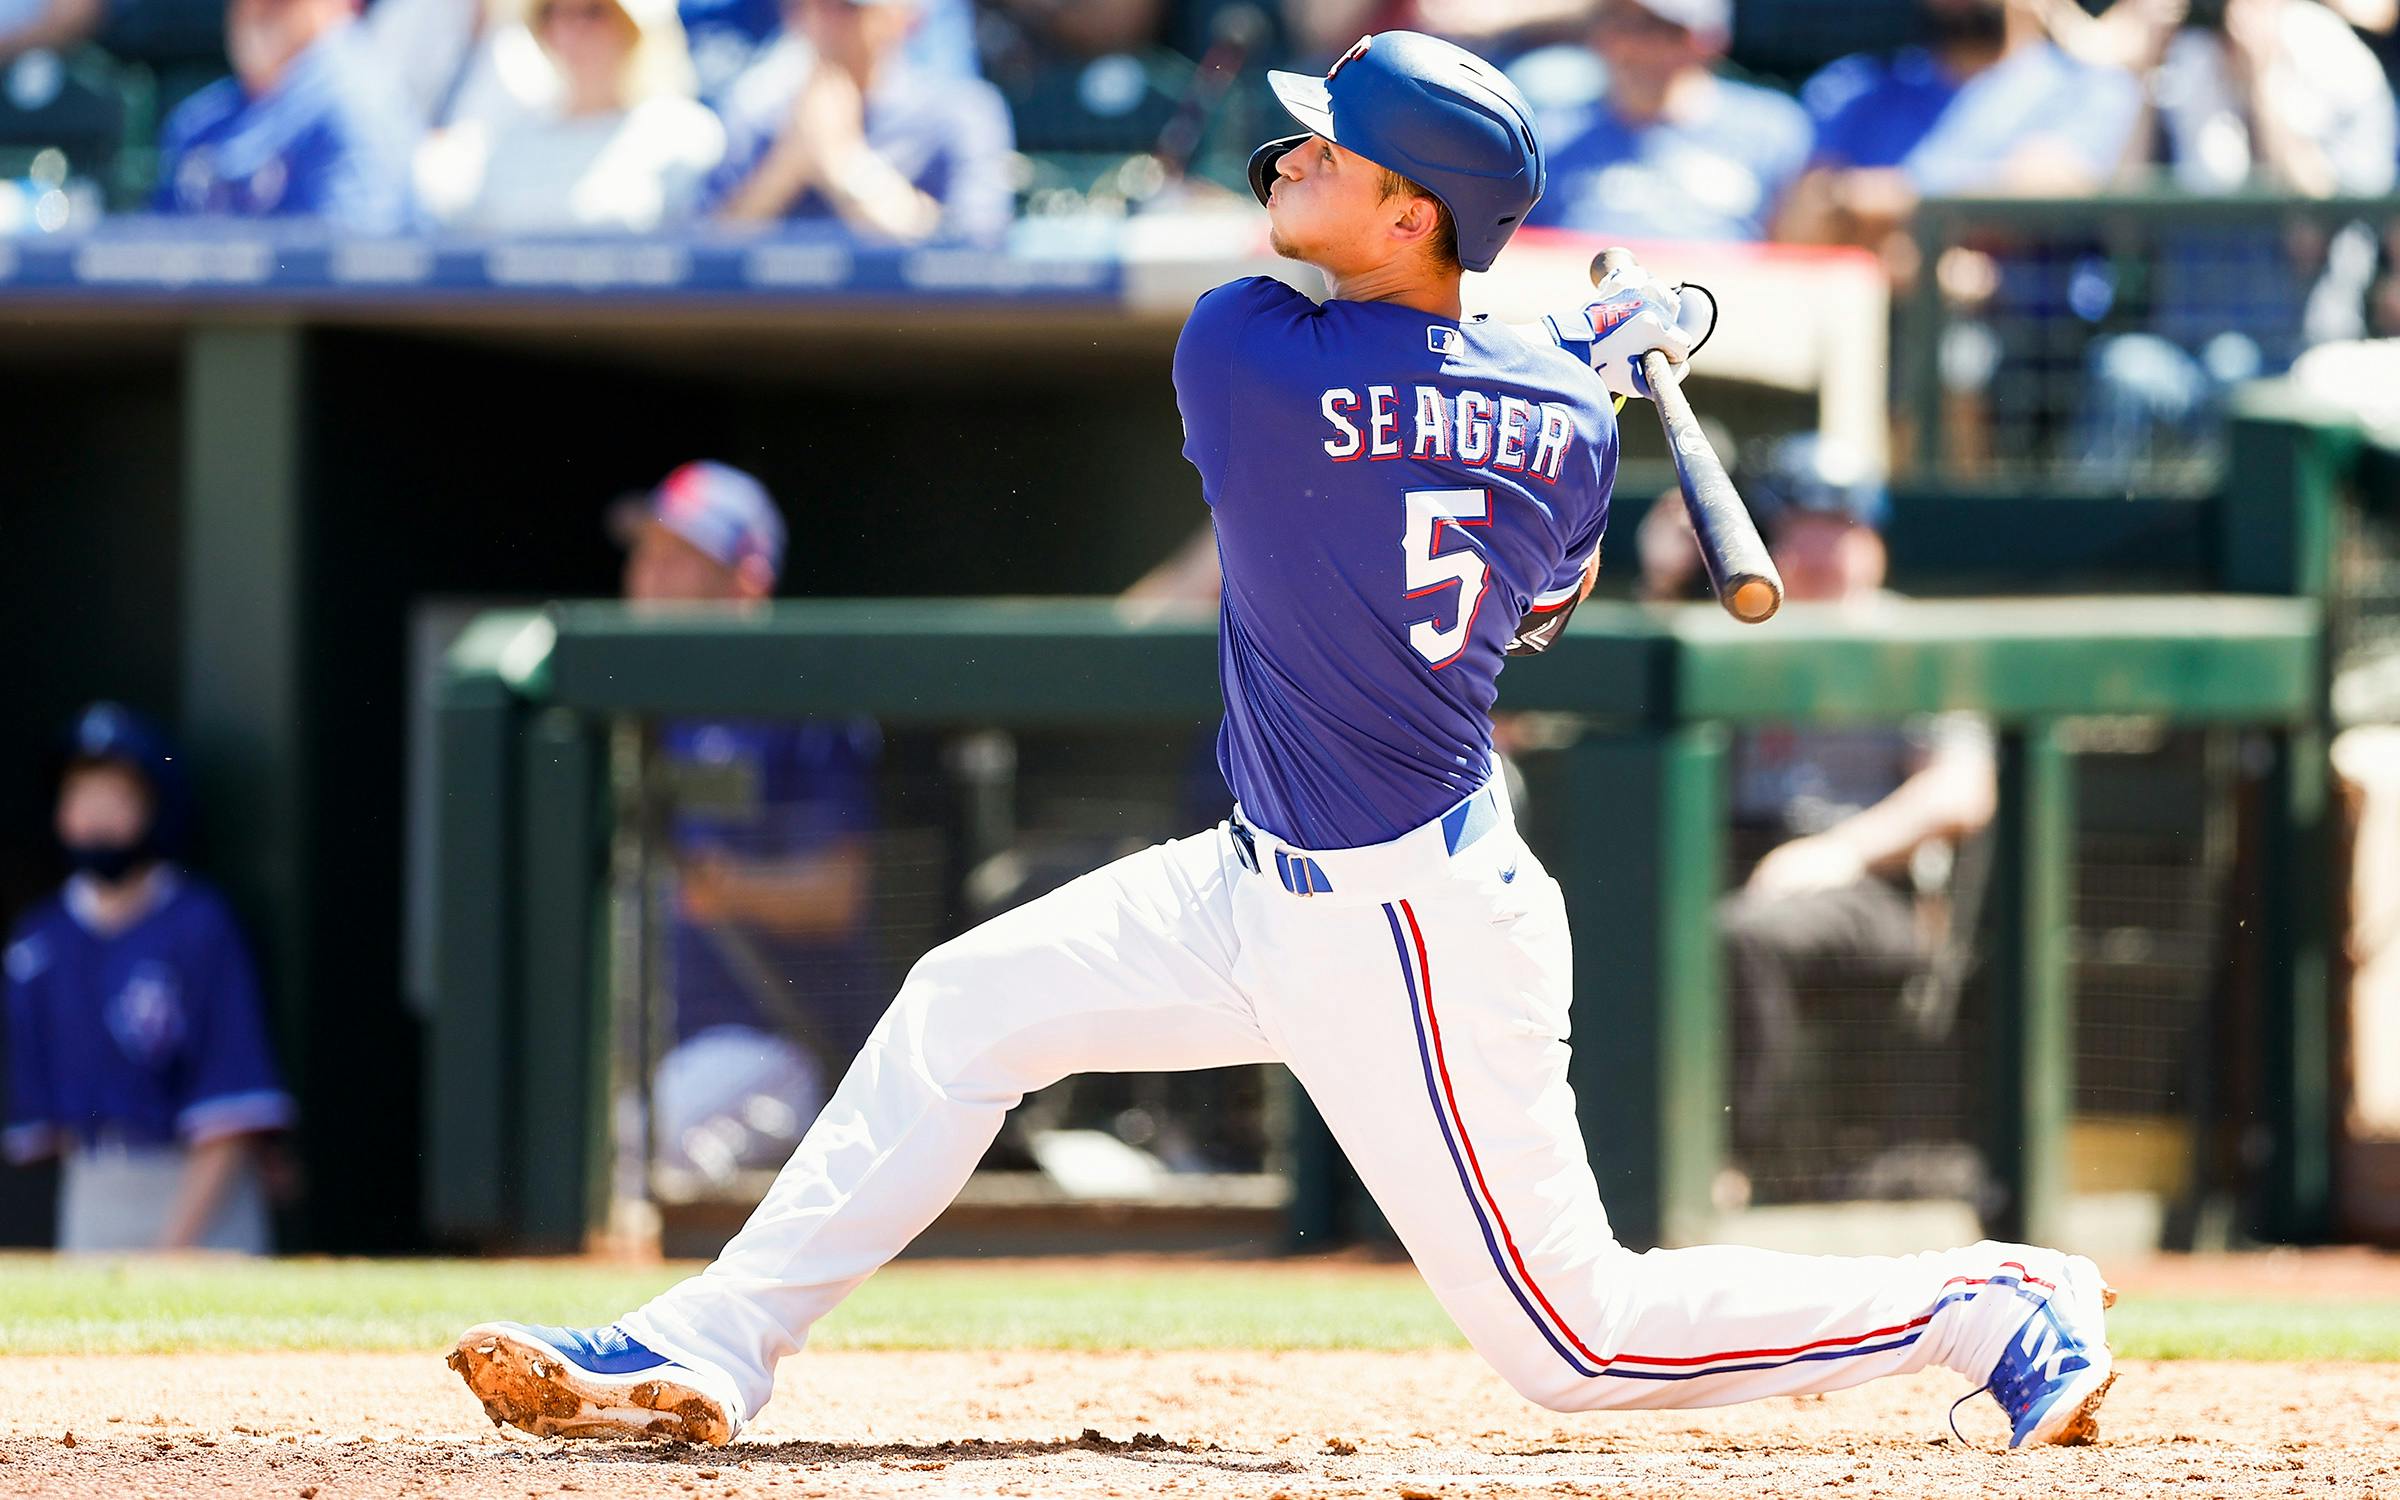 Trends International MLB Texas Rangers - Corey Seager 2023 Poster